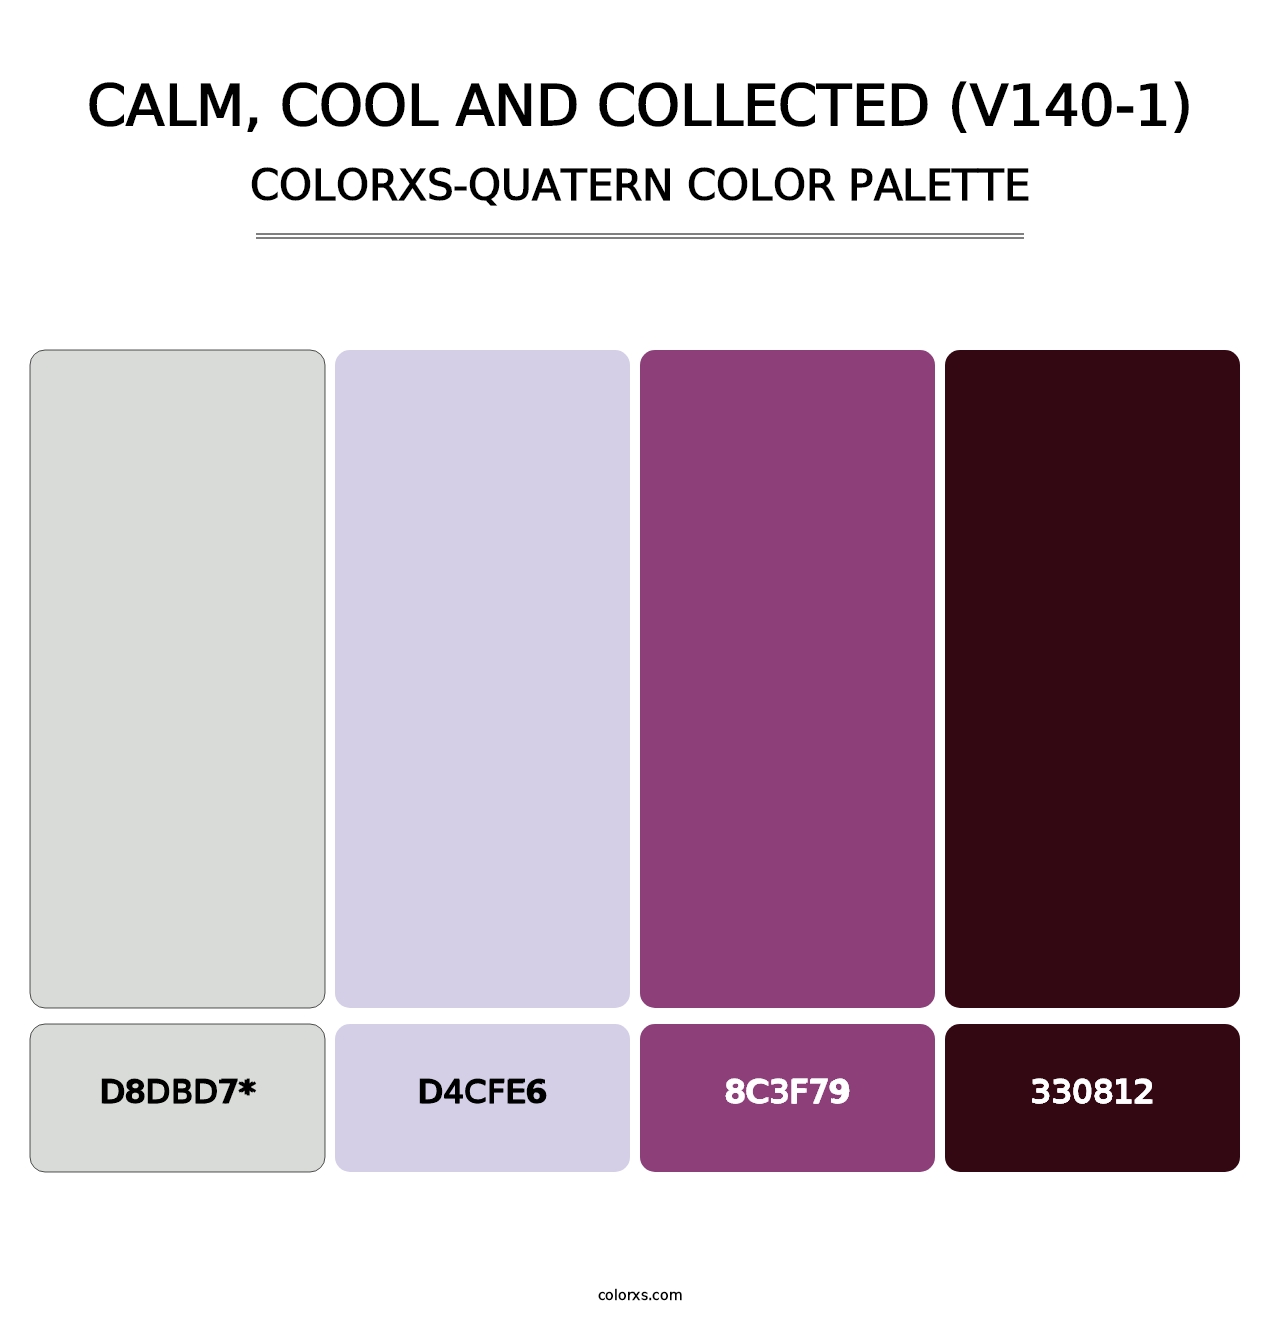 Calm, Cool and Collected (V140-1) - Colorxs Quatern Palette